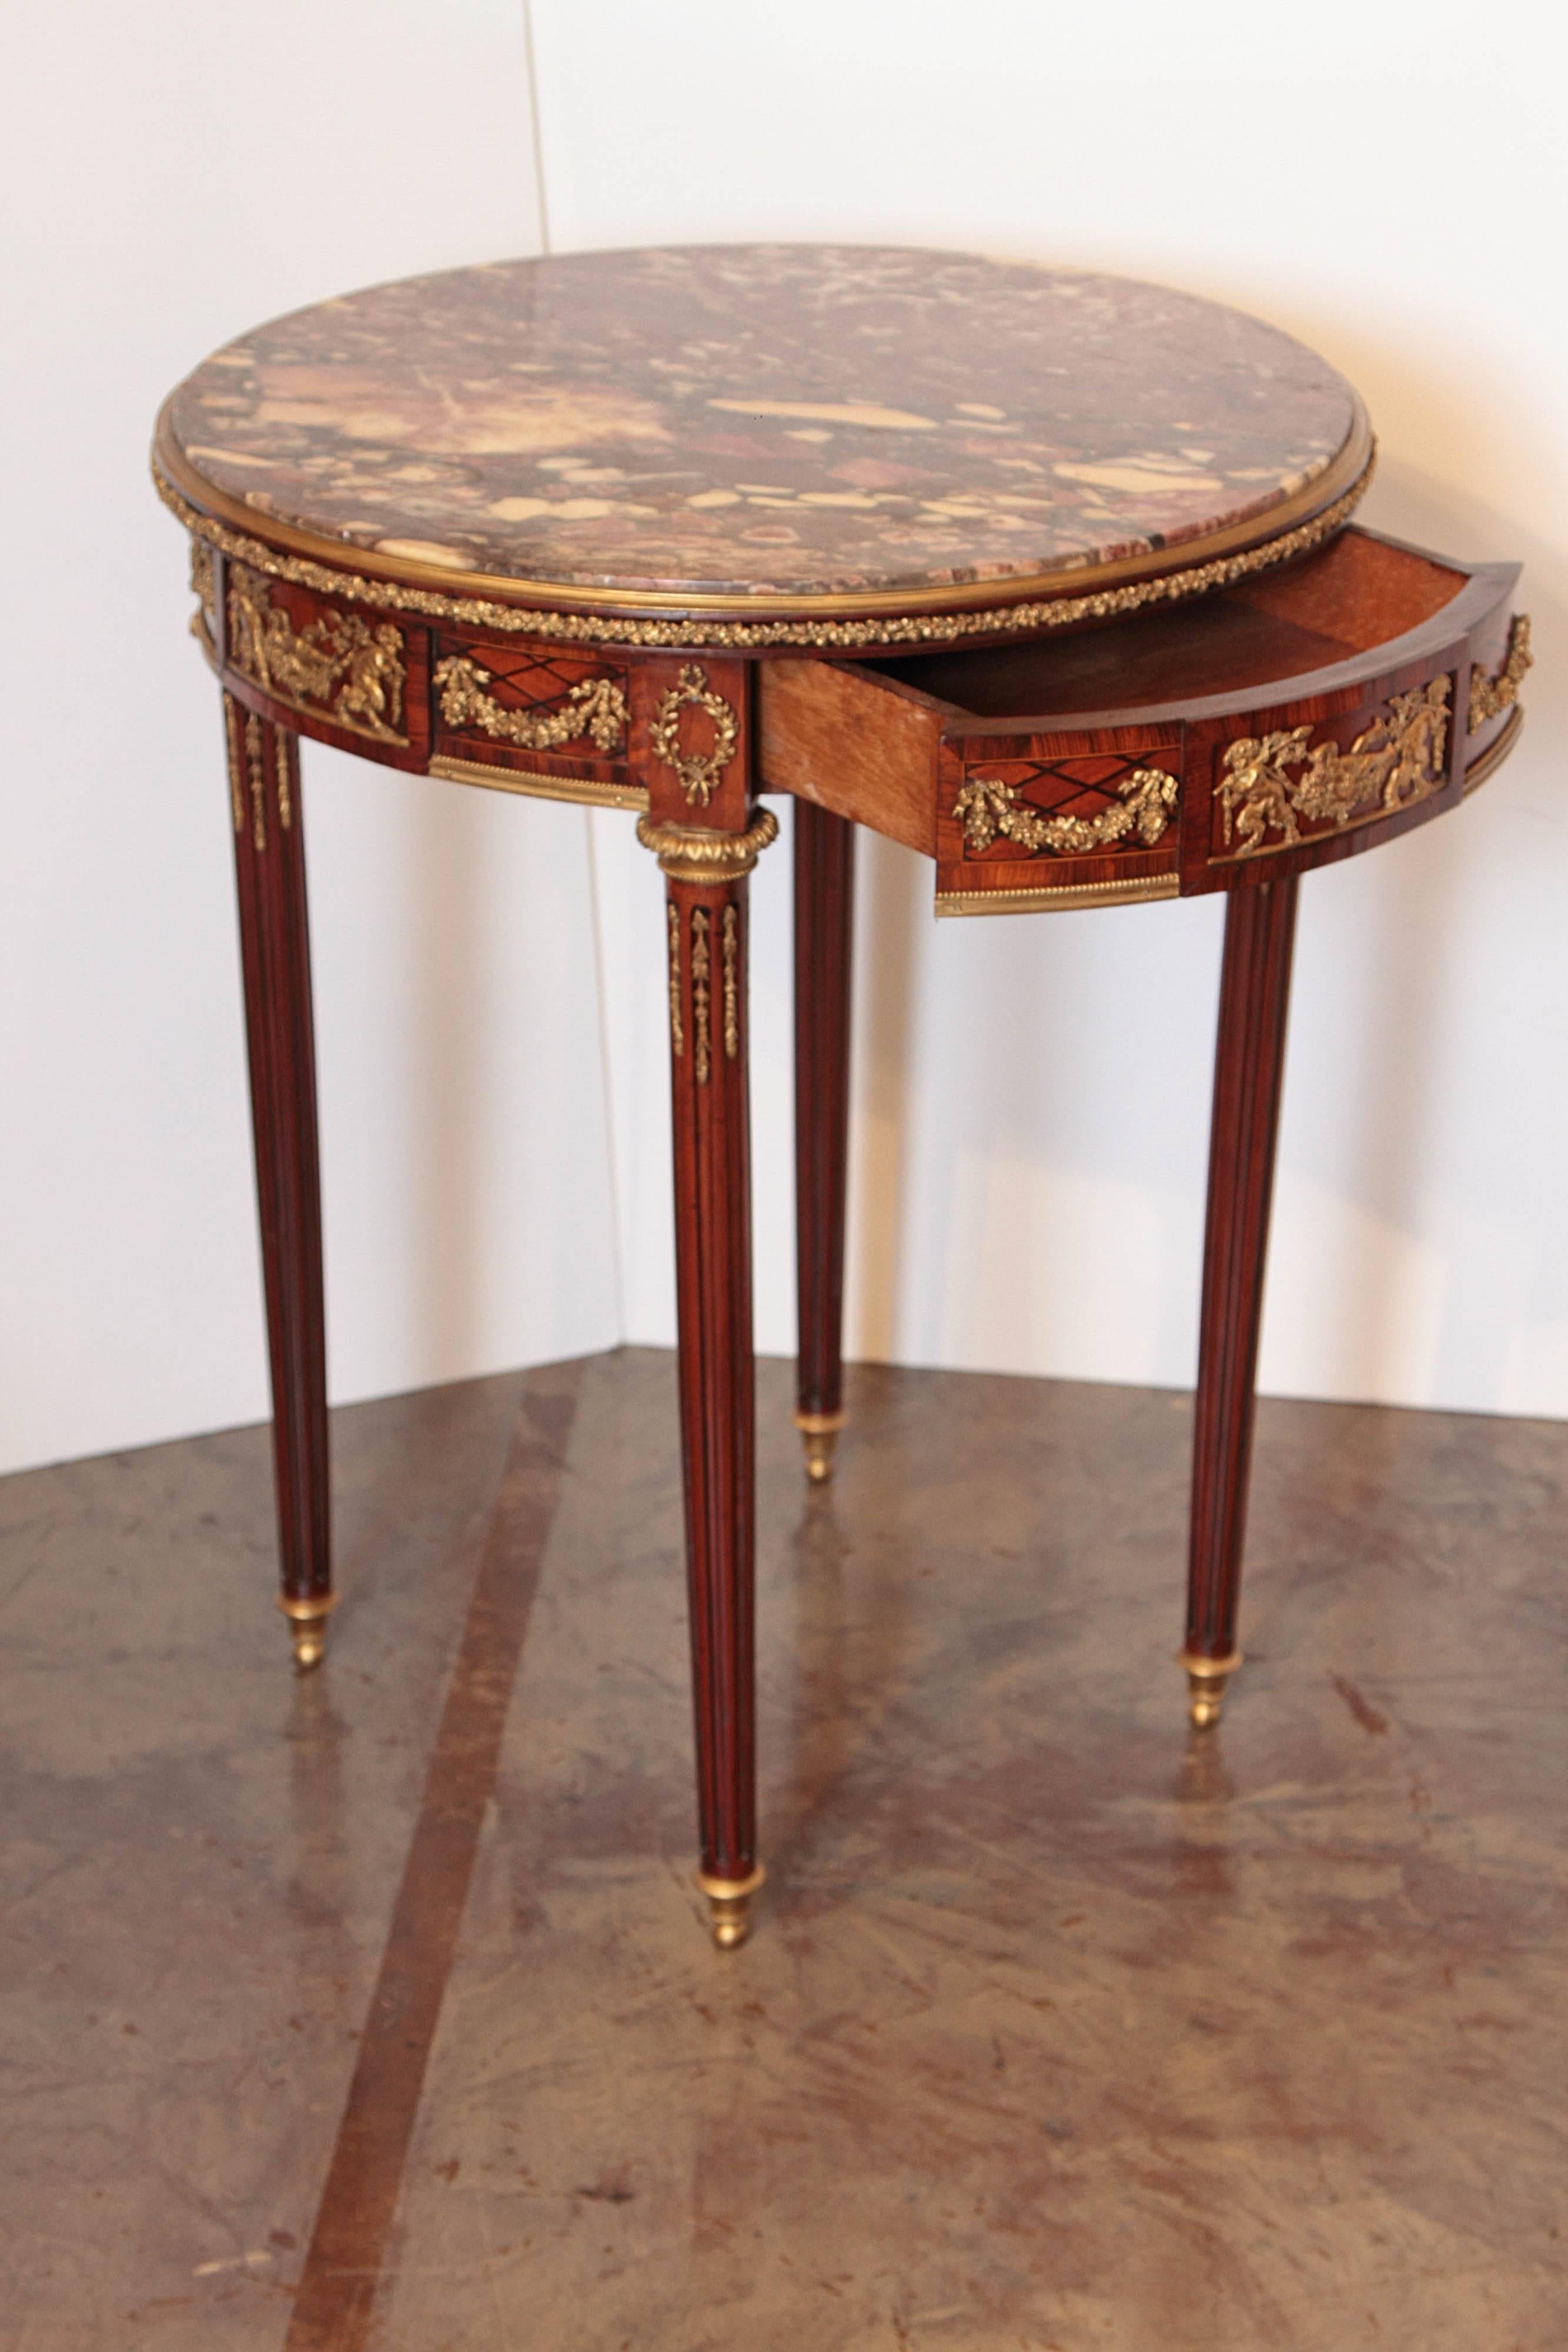 19th Century French Mahogany and Gilt Bronze Marble Top Gueridon Table For Sale 4